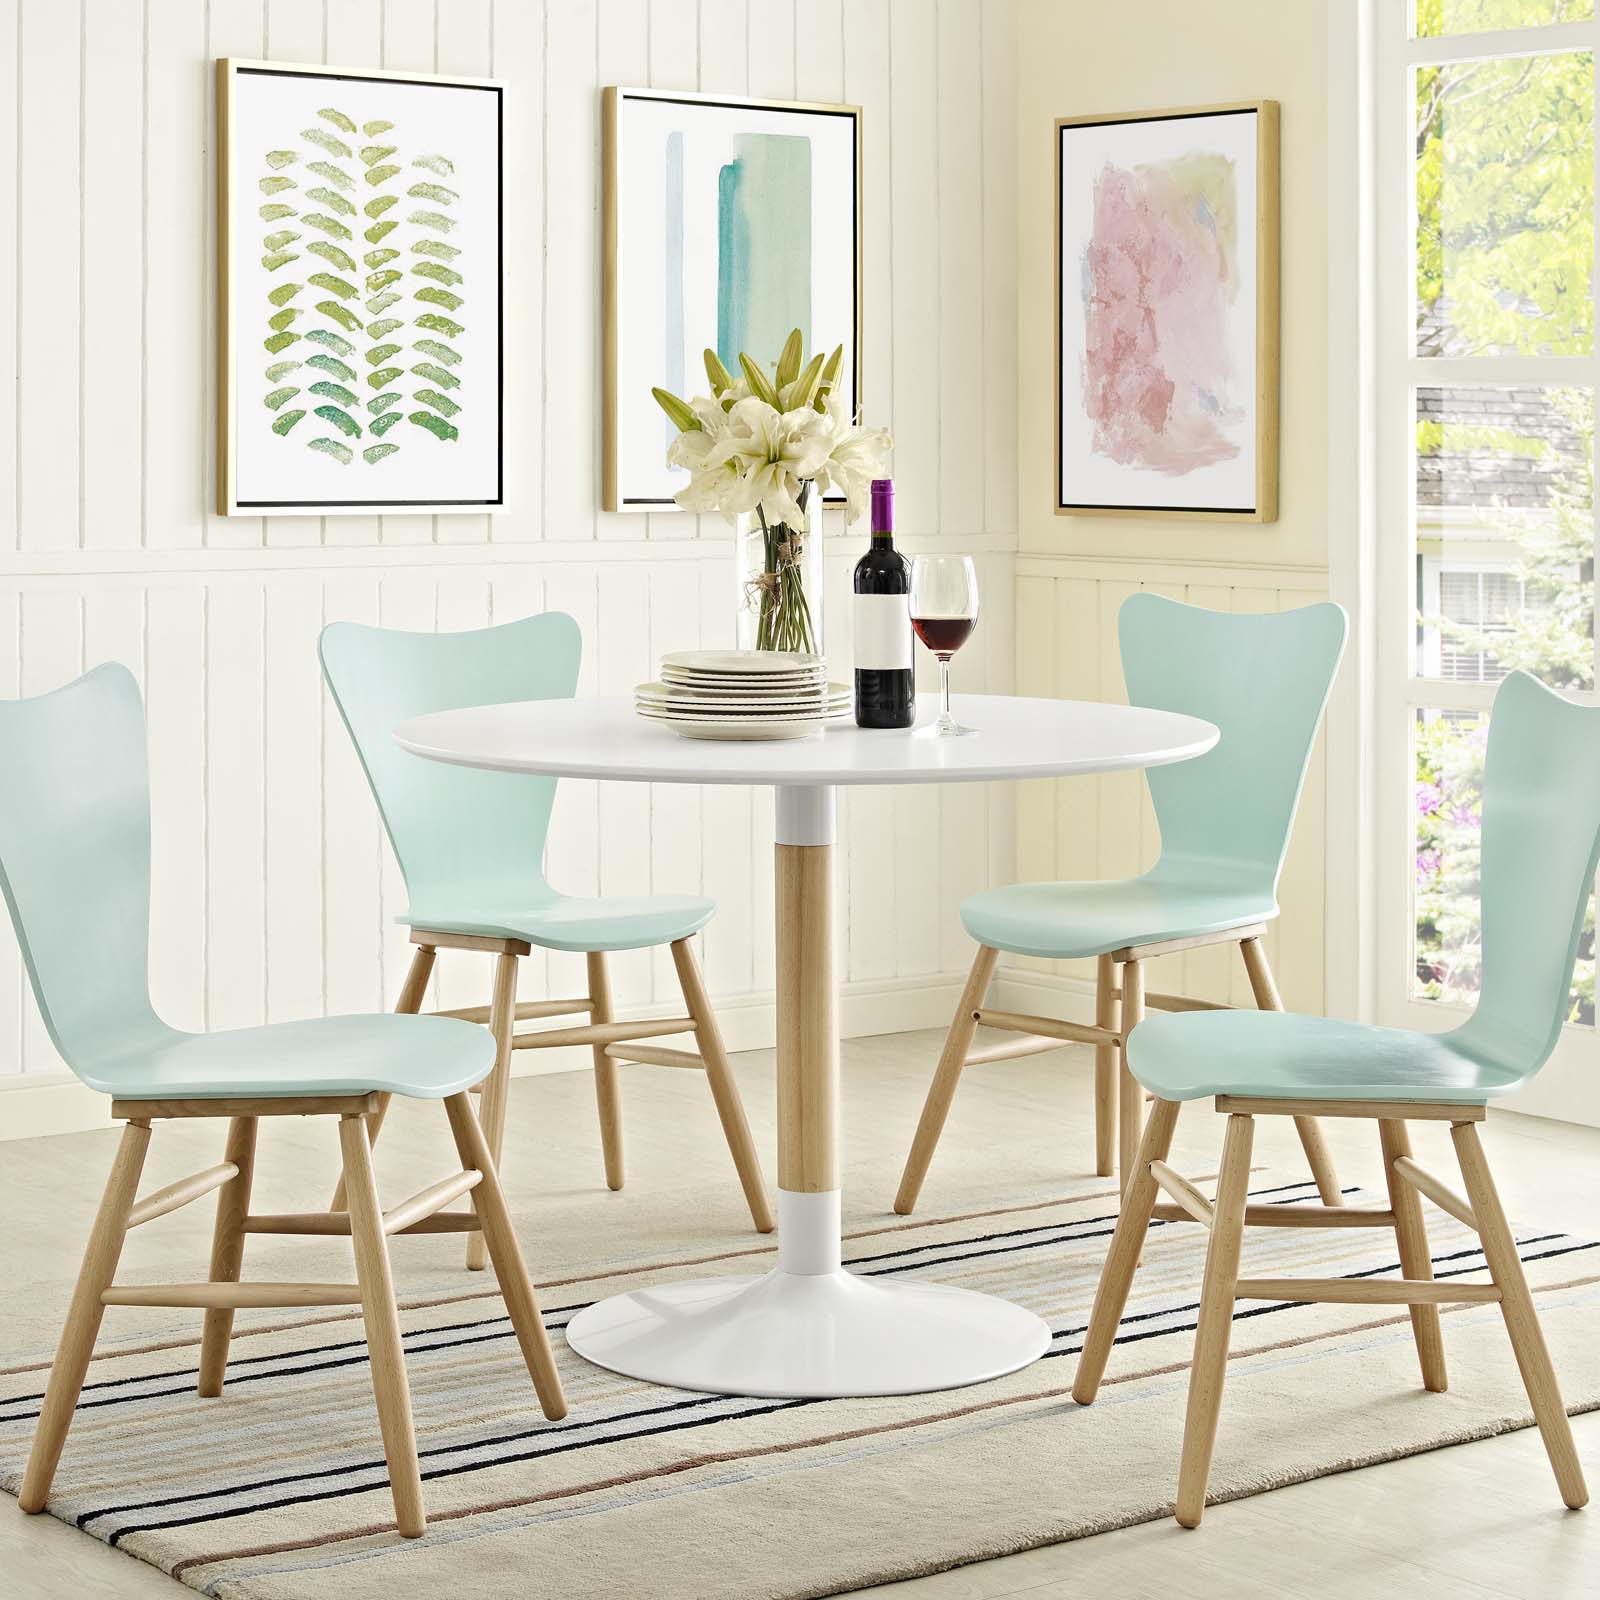 Whirl Round Dining Table - East Shore Modern Home Furnishings